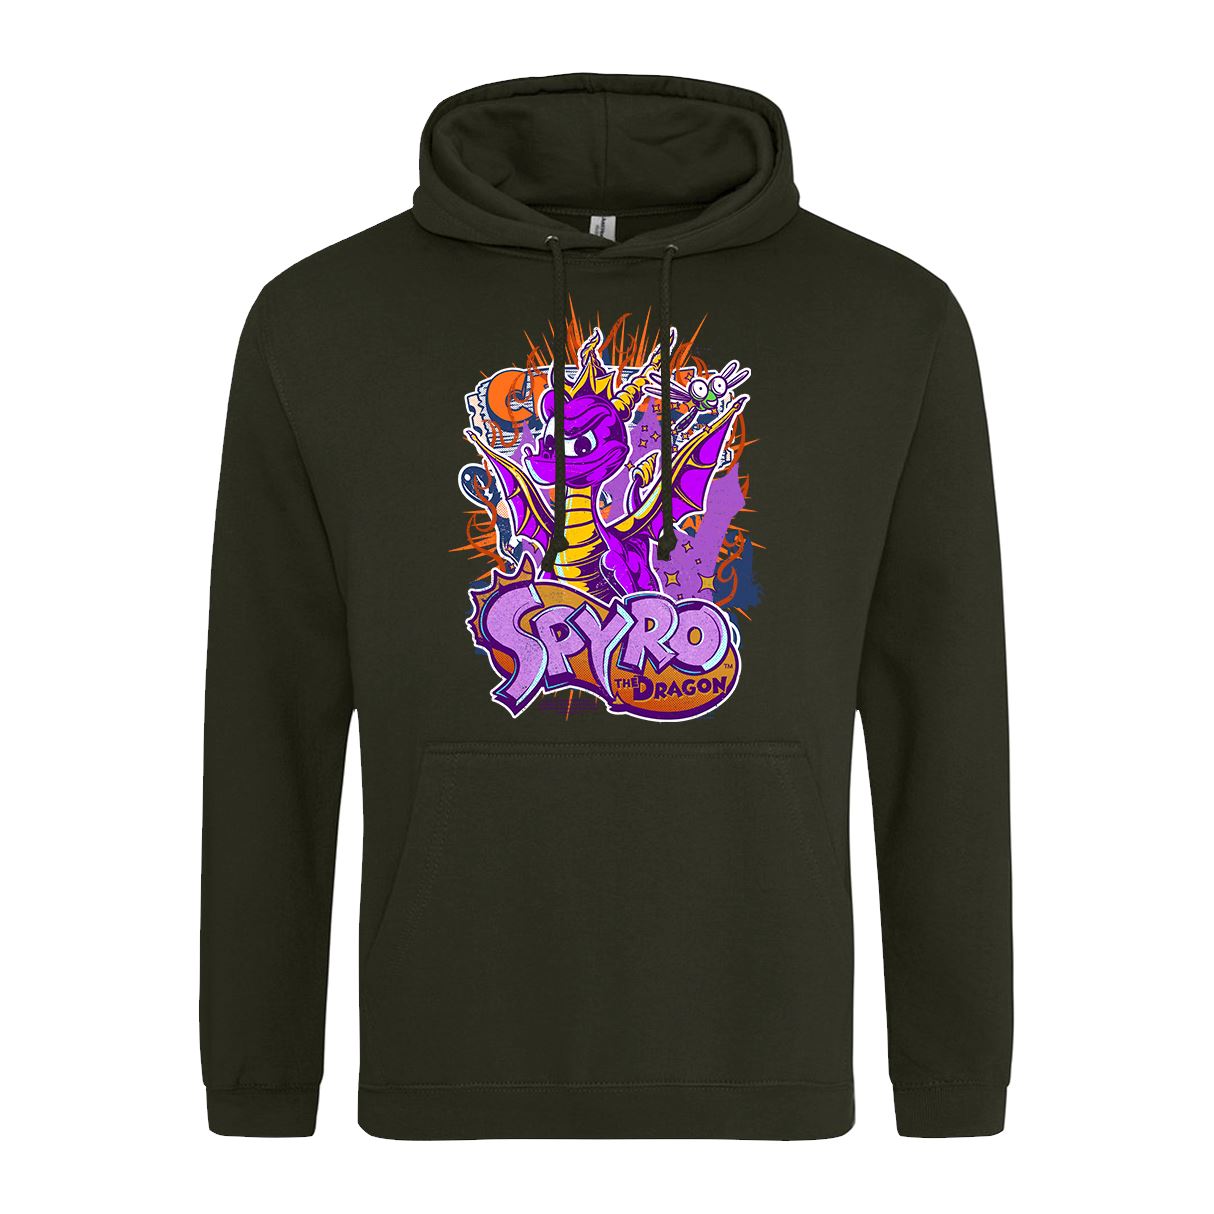 Spyro The Dragon Retro Gaming Hoodie Hoodie Seven Squared Small 36" Chest Combat Green 